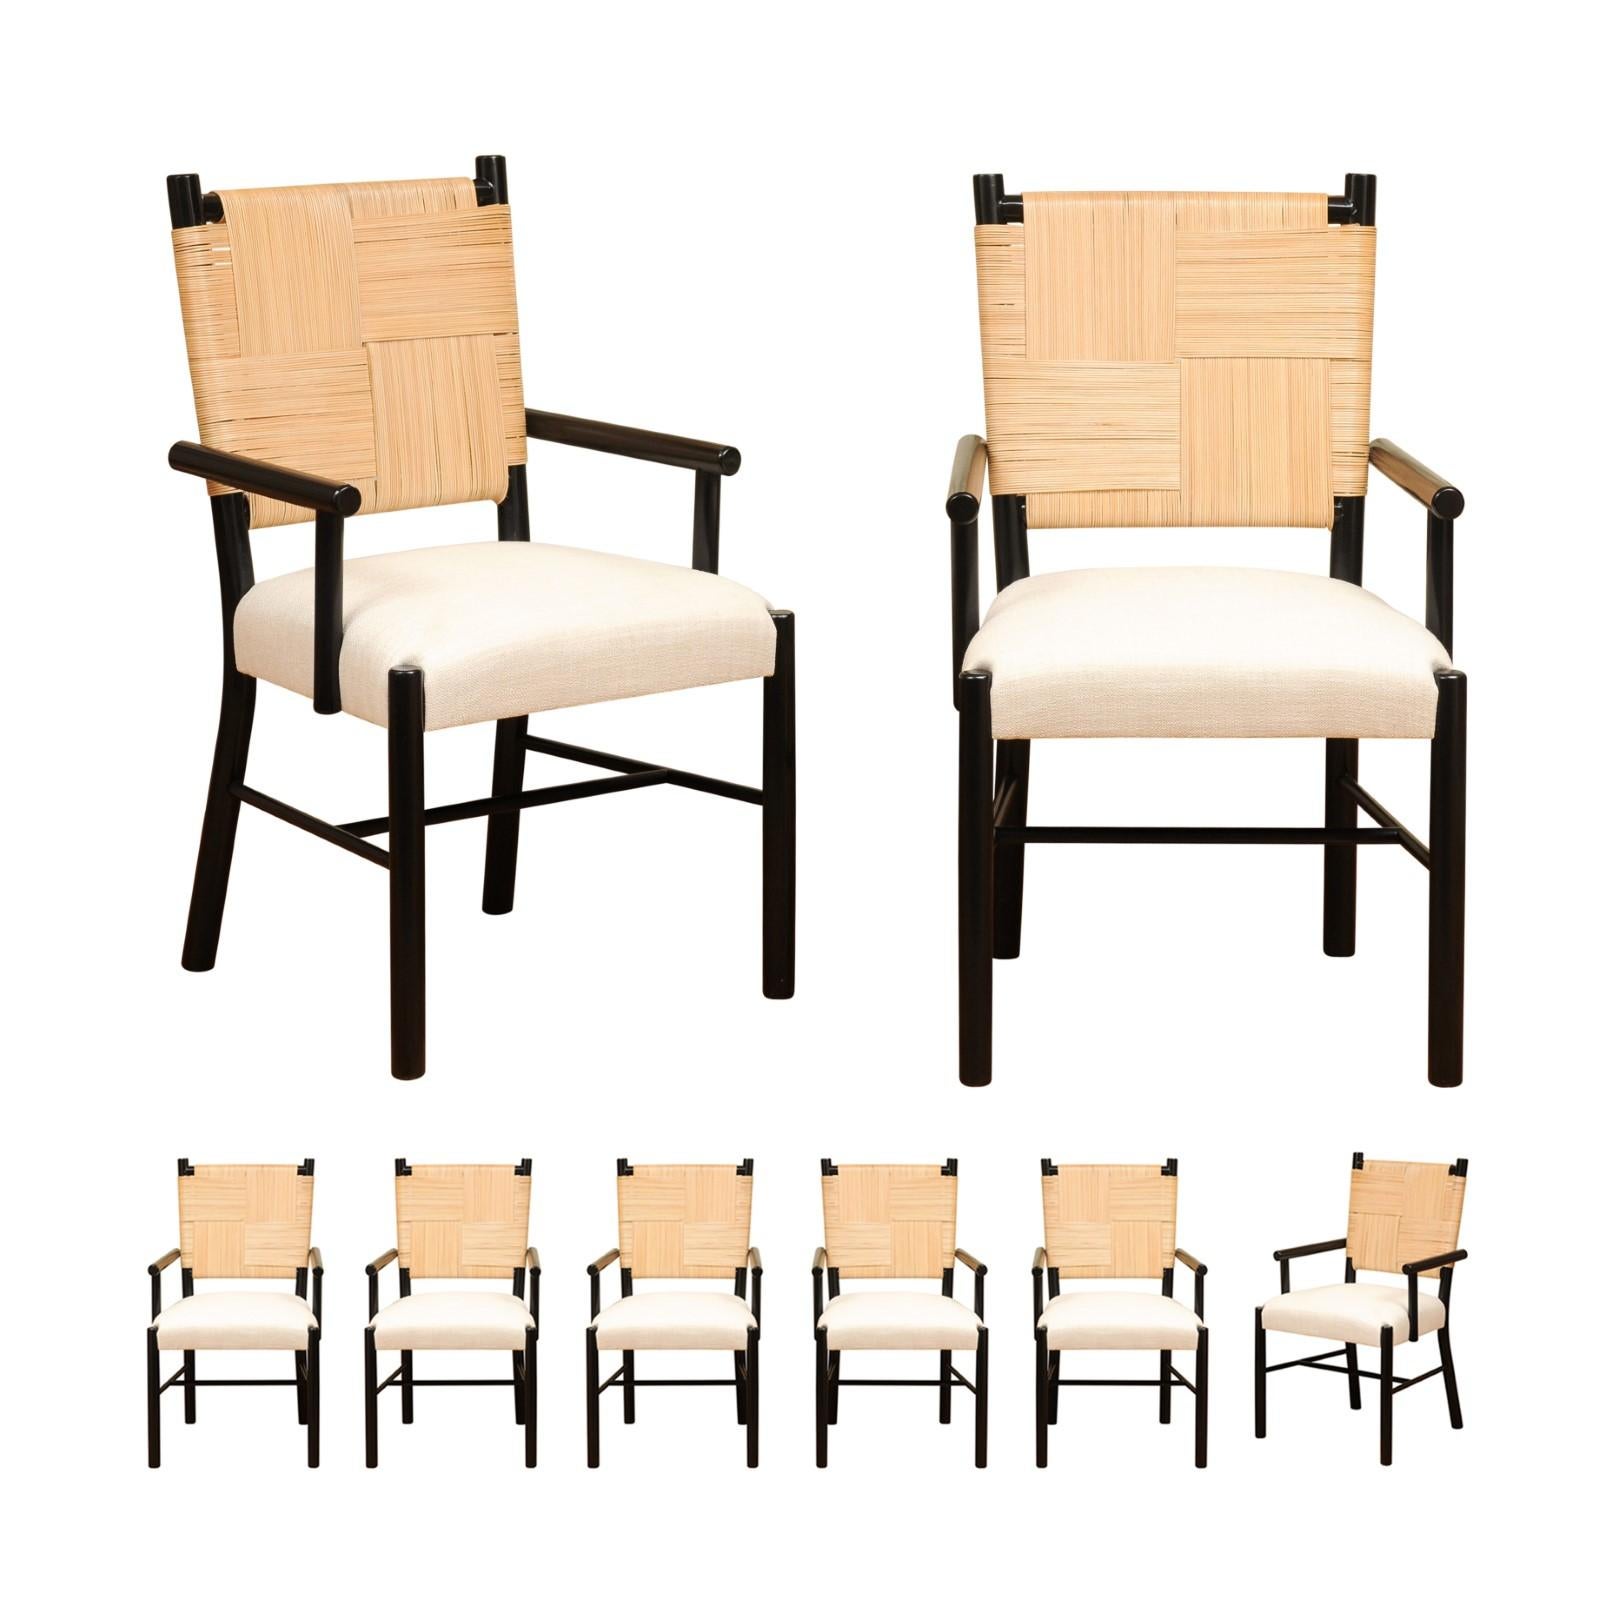 This magnificent large ALL ARMS set of chairs is Unique on the World market. The set is shipped as professionally photographed and described in the listing narrative: Meticulously professionally restored, newly custom upholstered and completely